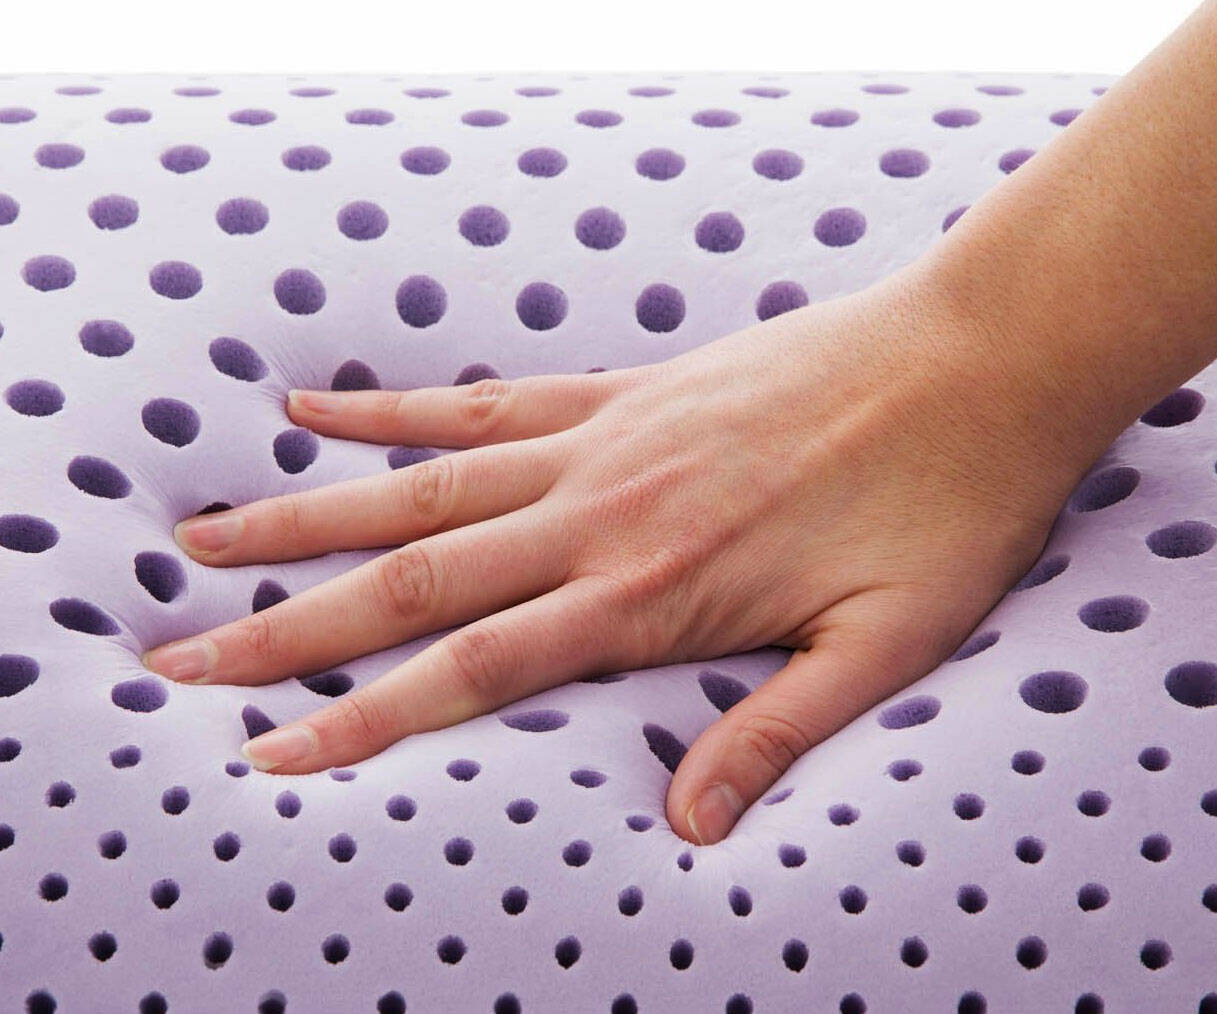 Aromatherapy Memory Foam Pillows - coolthings.us